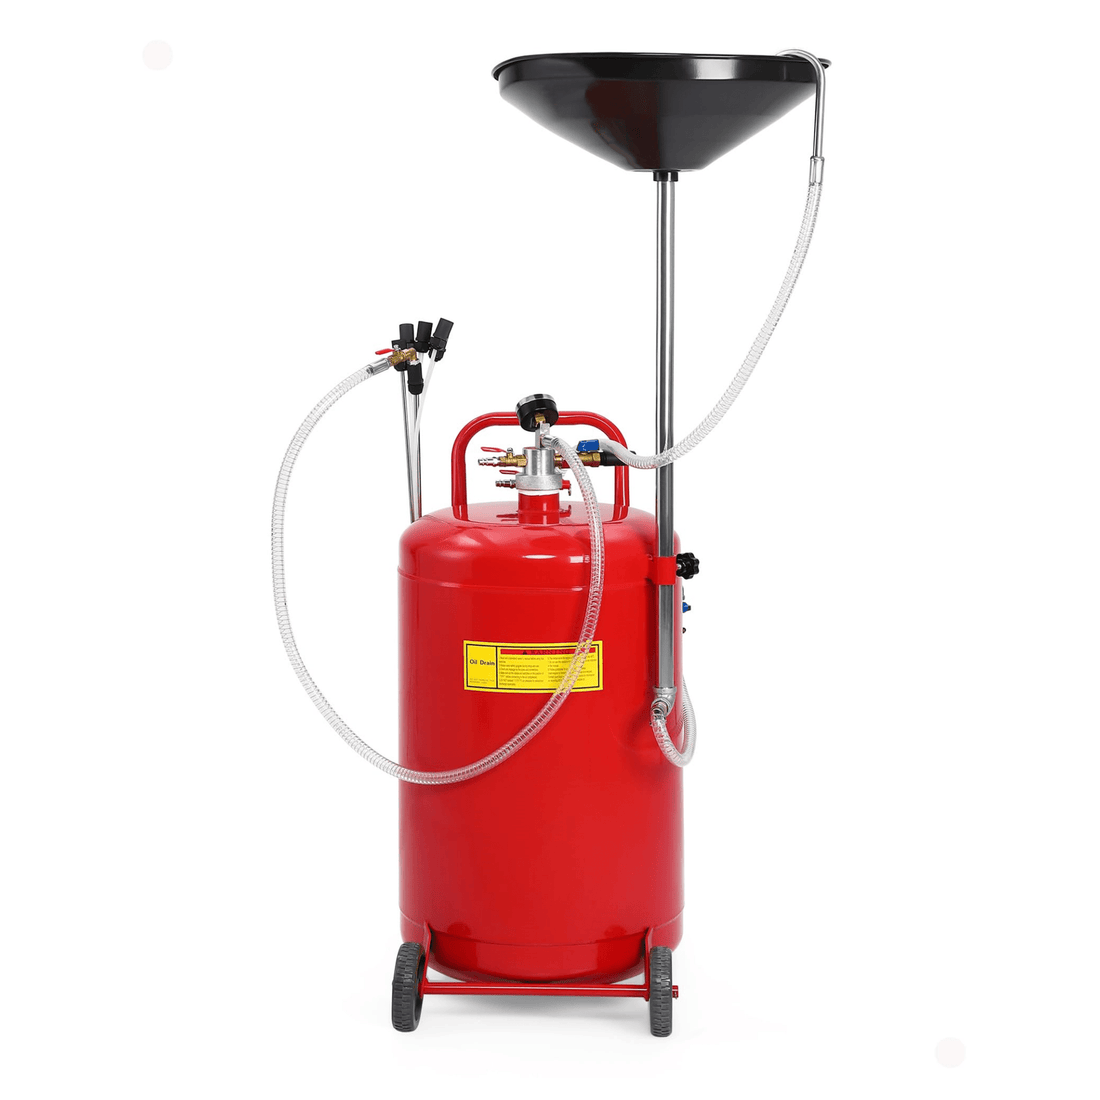 25 Gal Air-Operated Oil Drain Tank with Wheel, Red for Cars - GARVEE